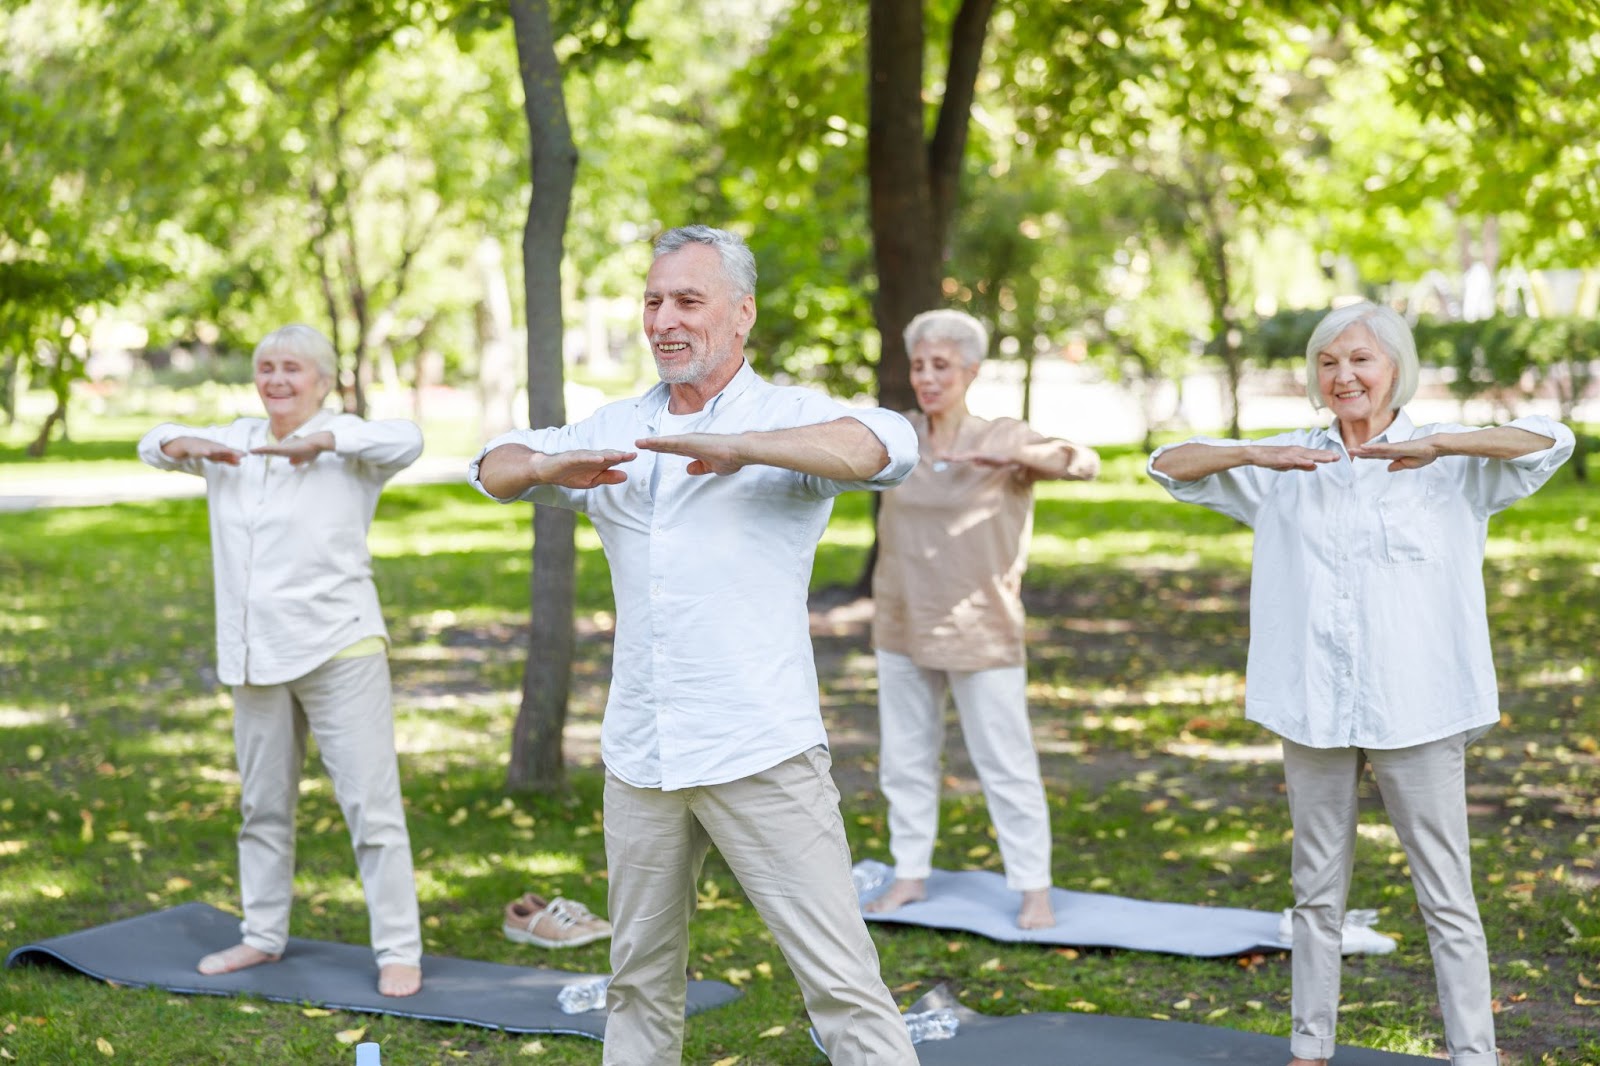 A group of four seniors dressed in white linen practice Tai Chi in an open, green public park. They’re barefoot and smiling.